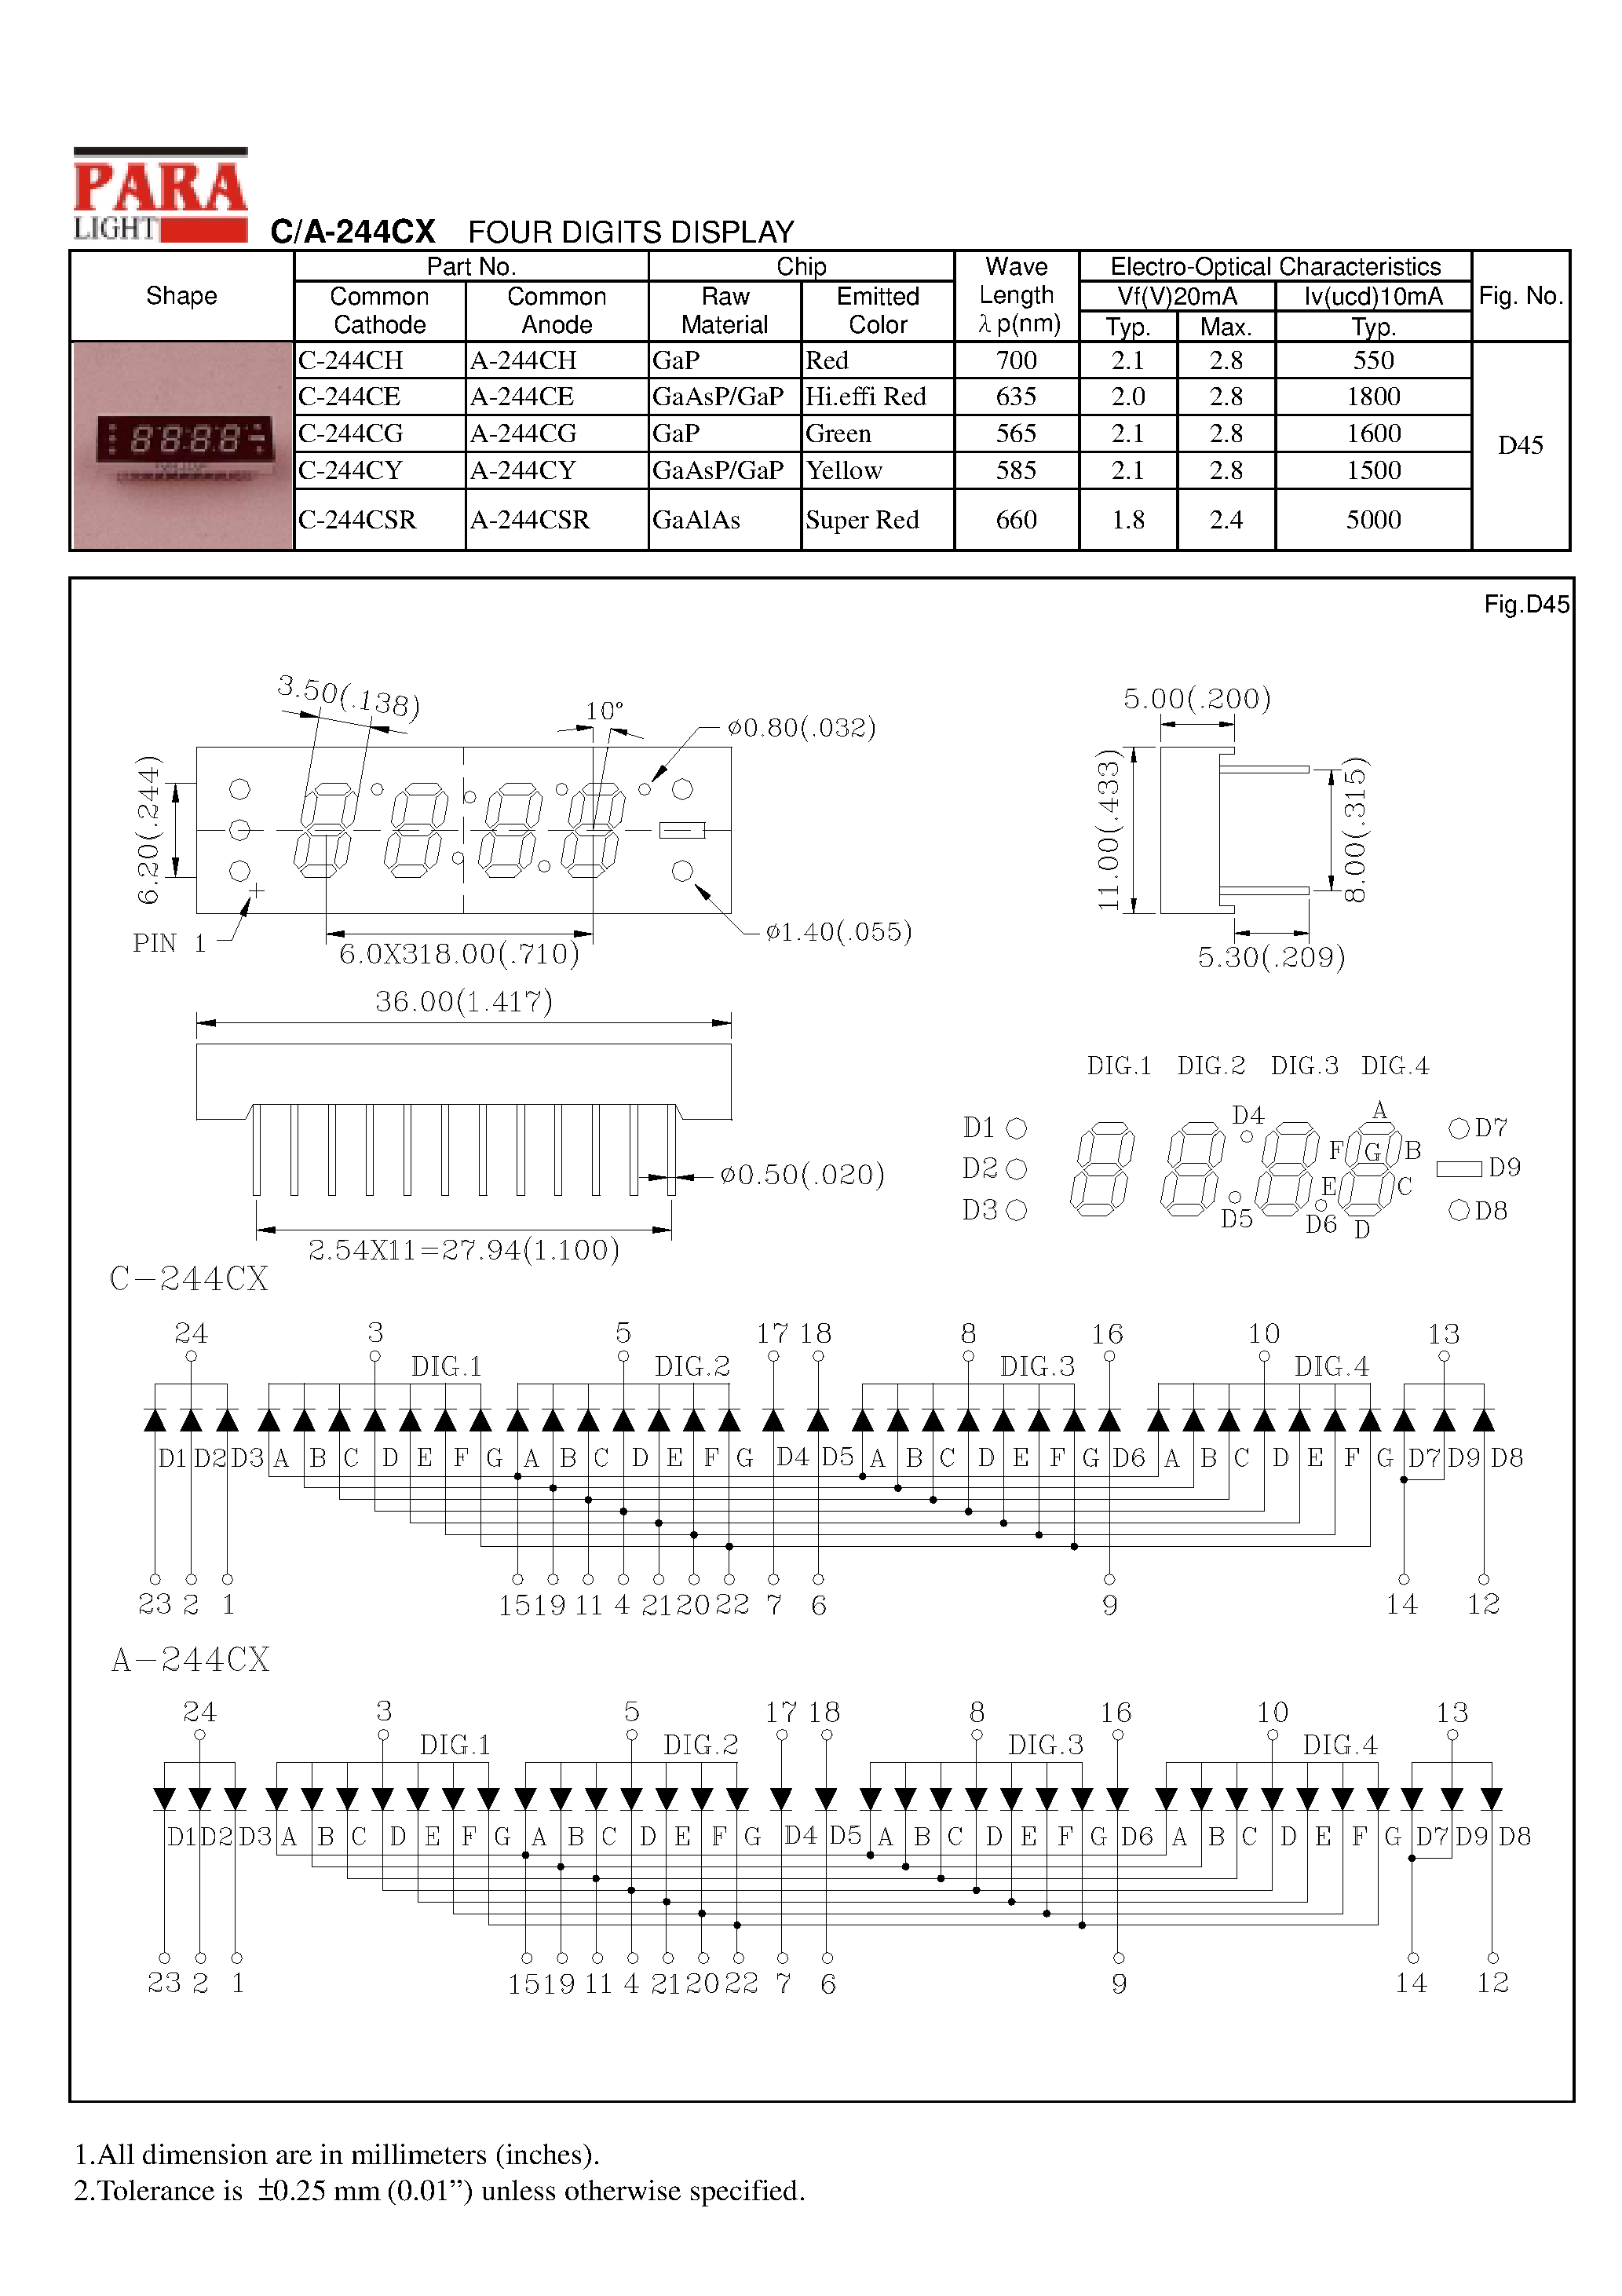 Datasheet A-244CY - FOUR DIGITS DISPLAY page 1